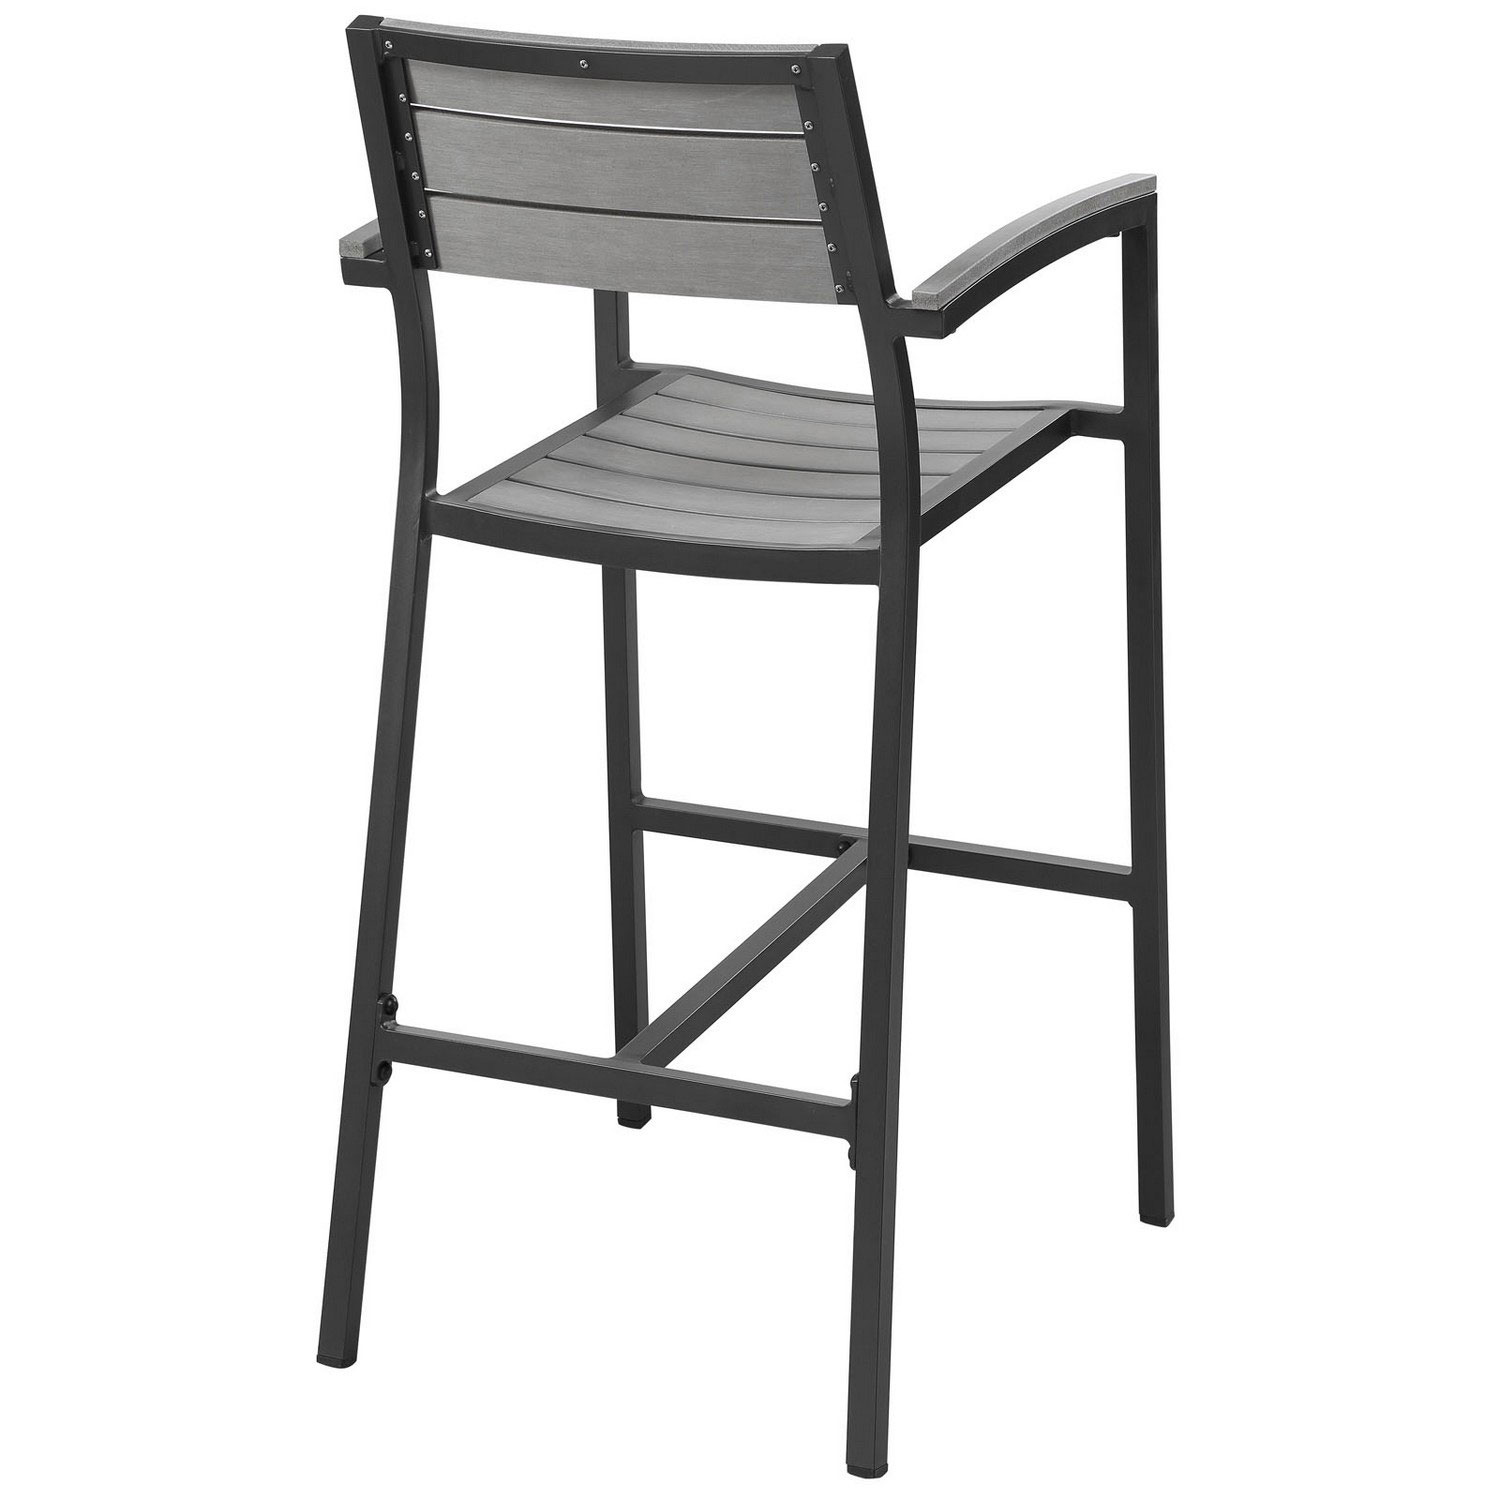 Modway Maine Outdoor Patio Bar Stool - Brown/Gray